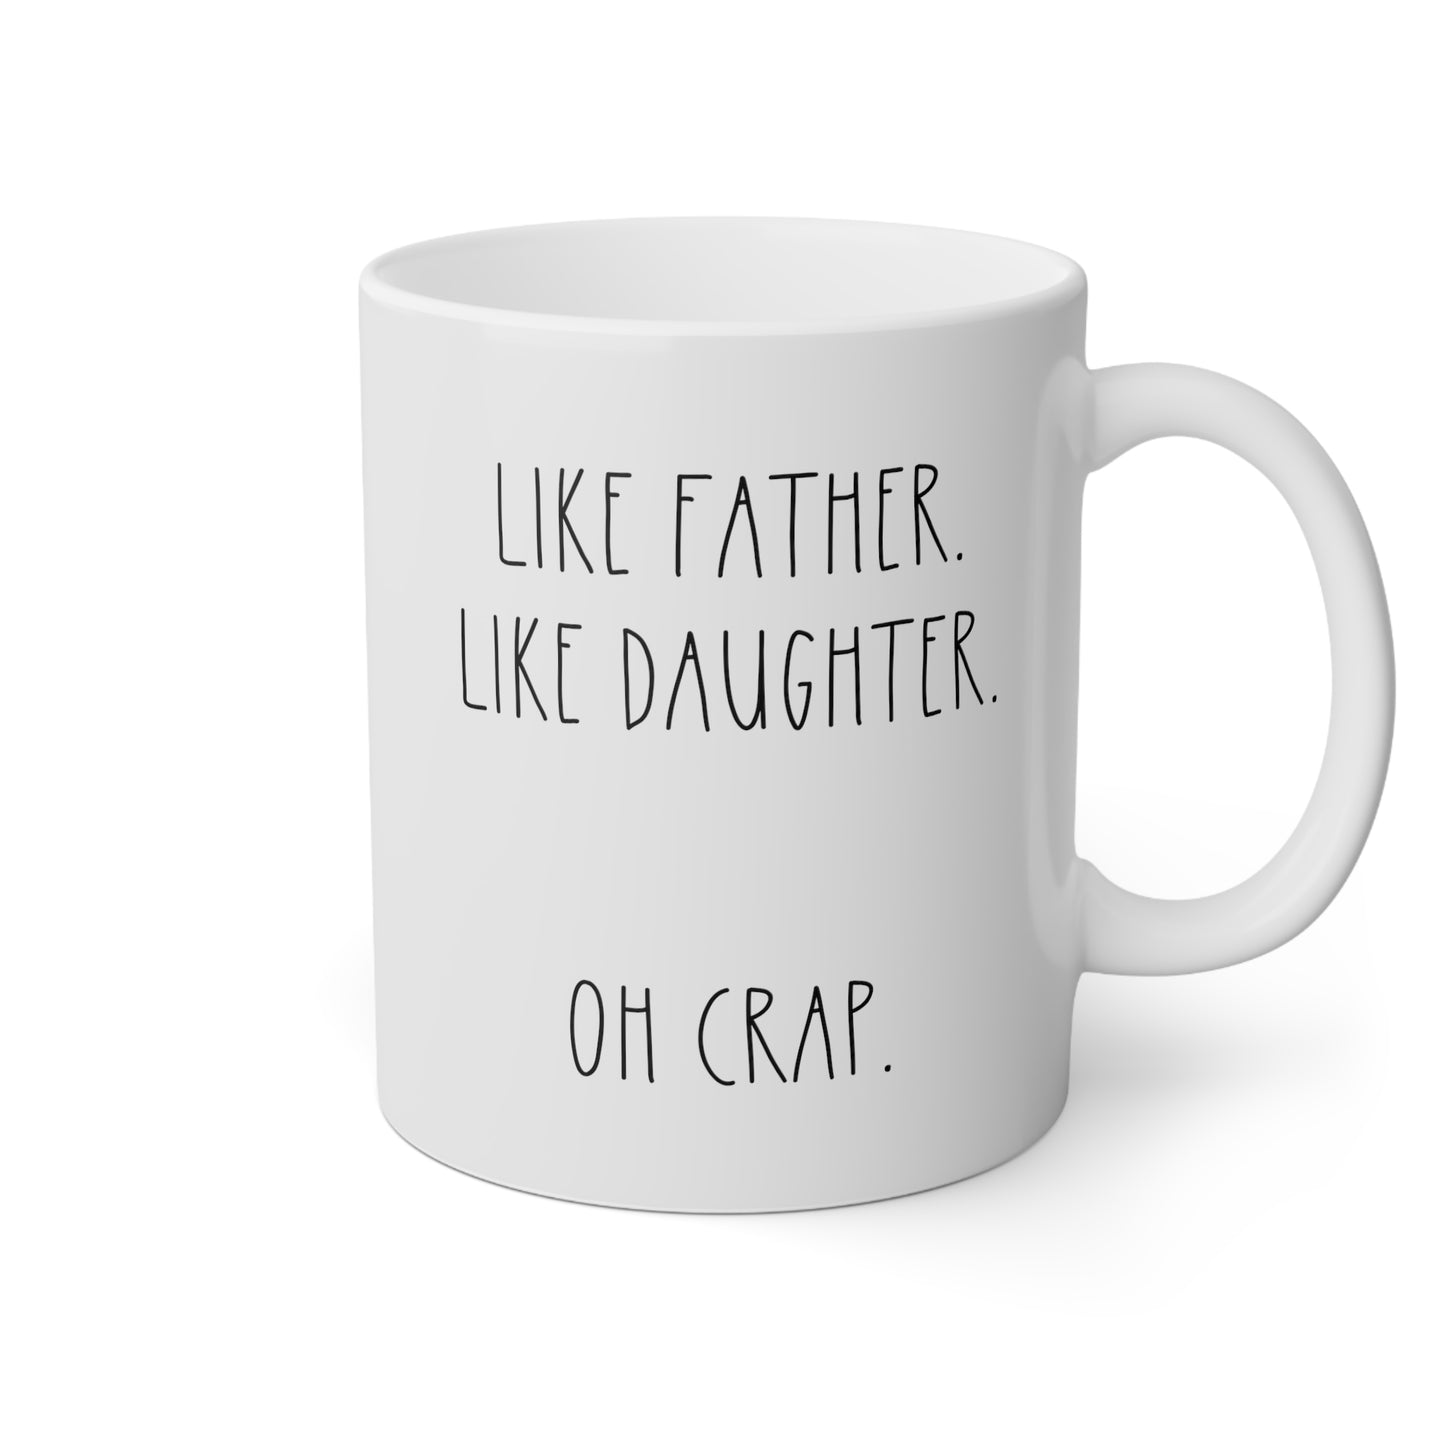 Like Father Like Daughter Oh Crap 11oz white funny large coffee mug gift for dad fathers day christmas birthday waveywares wavey wares wavywares wavy wares